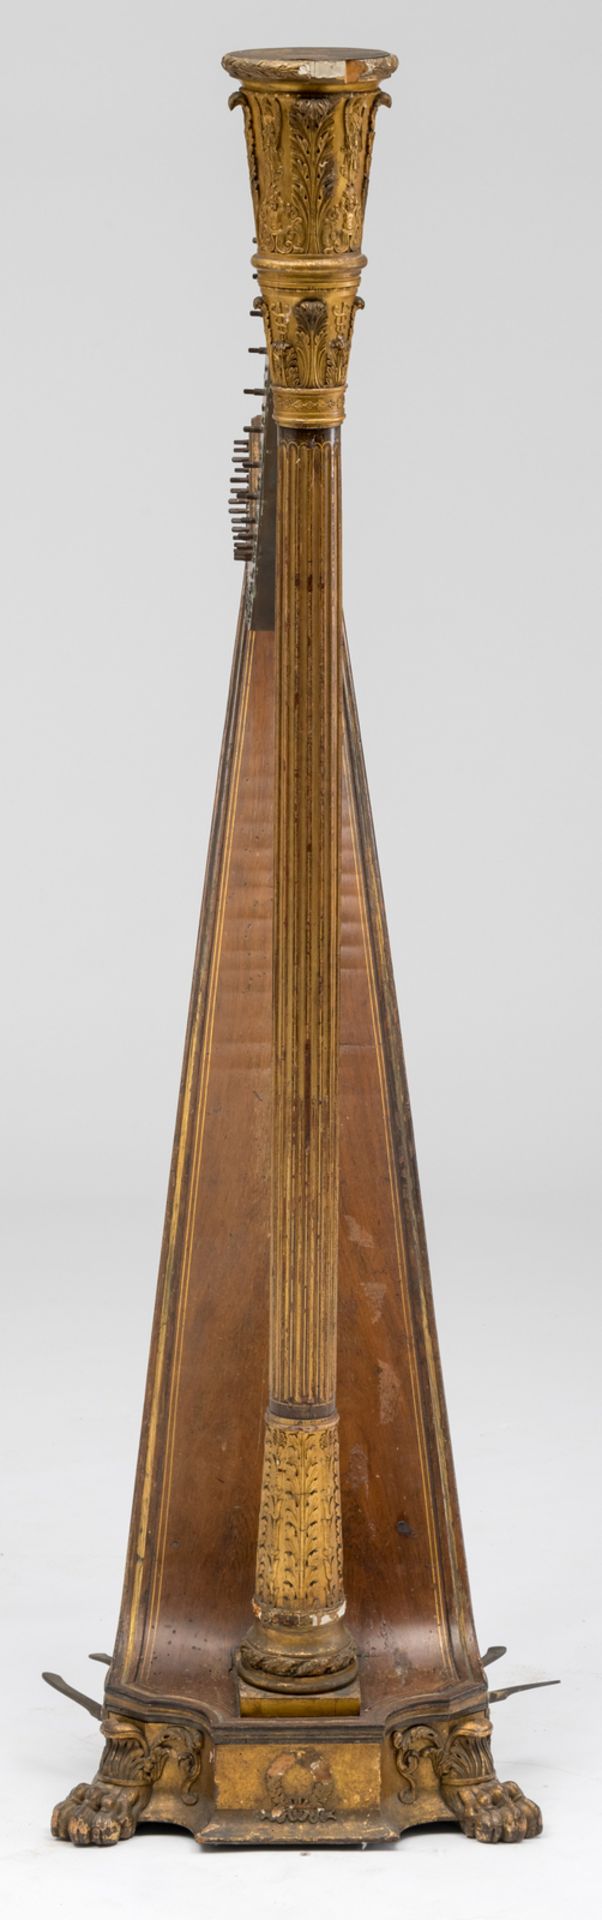 A 19th C neoclassical parcel gilt decorated rosewood harp, by French manufacturer Pleyel & Co., - Image 3 of 4